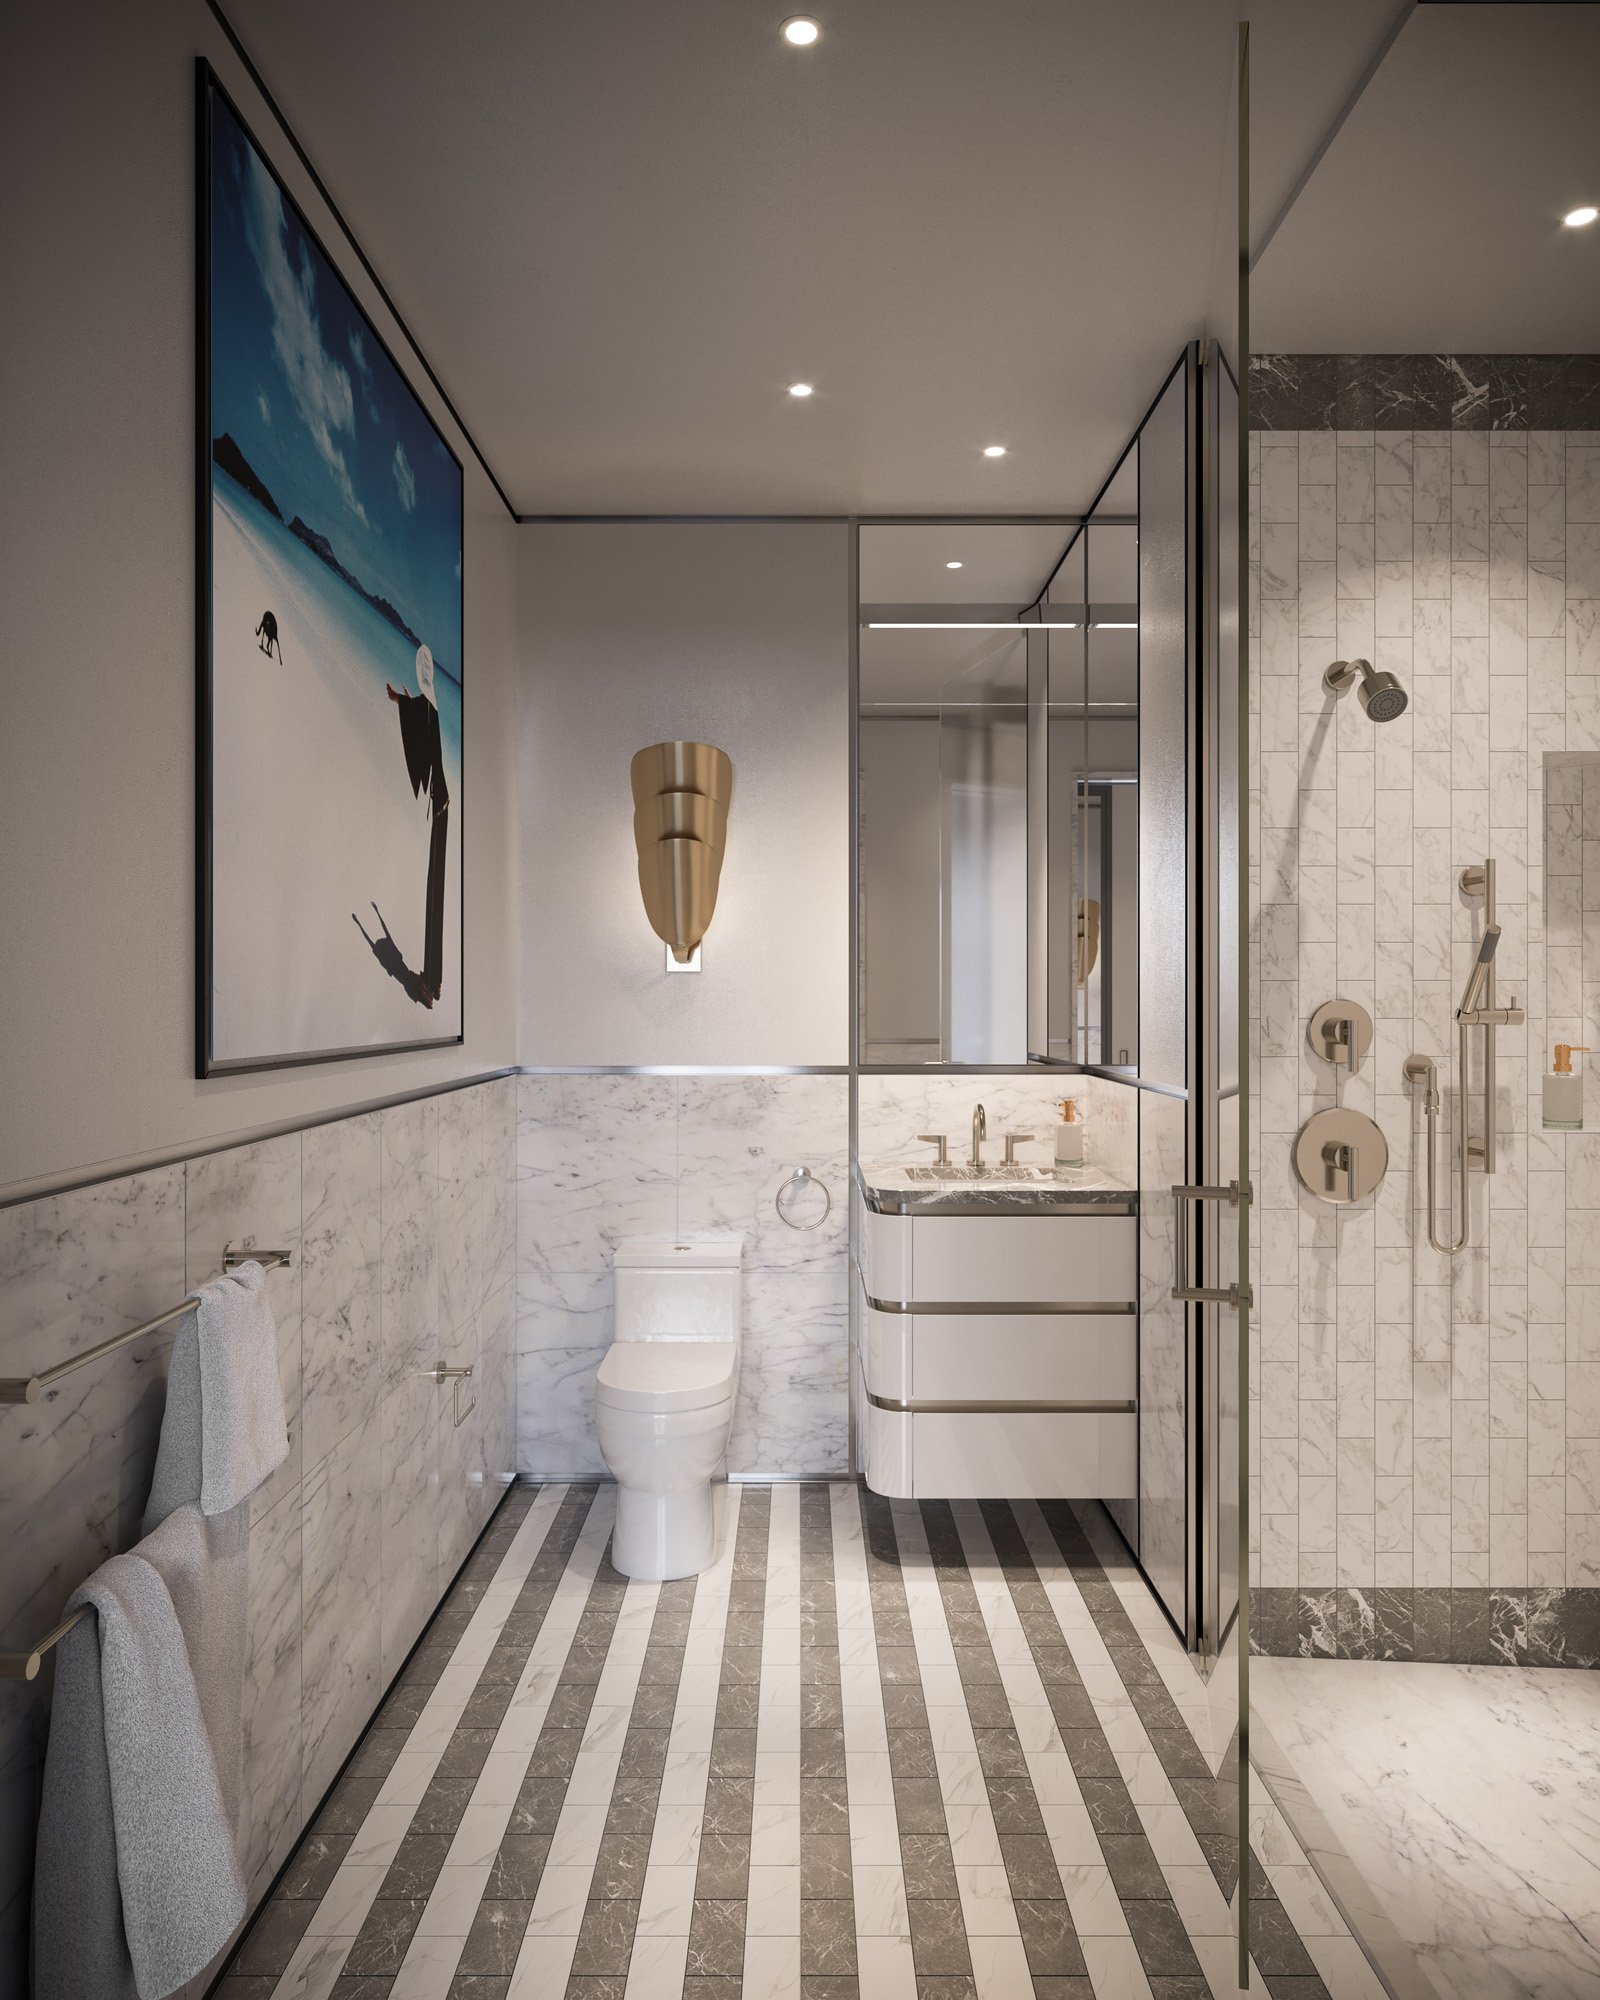 Secondary Bathroom of a Waldorf Astoria Apartment in NYC